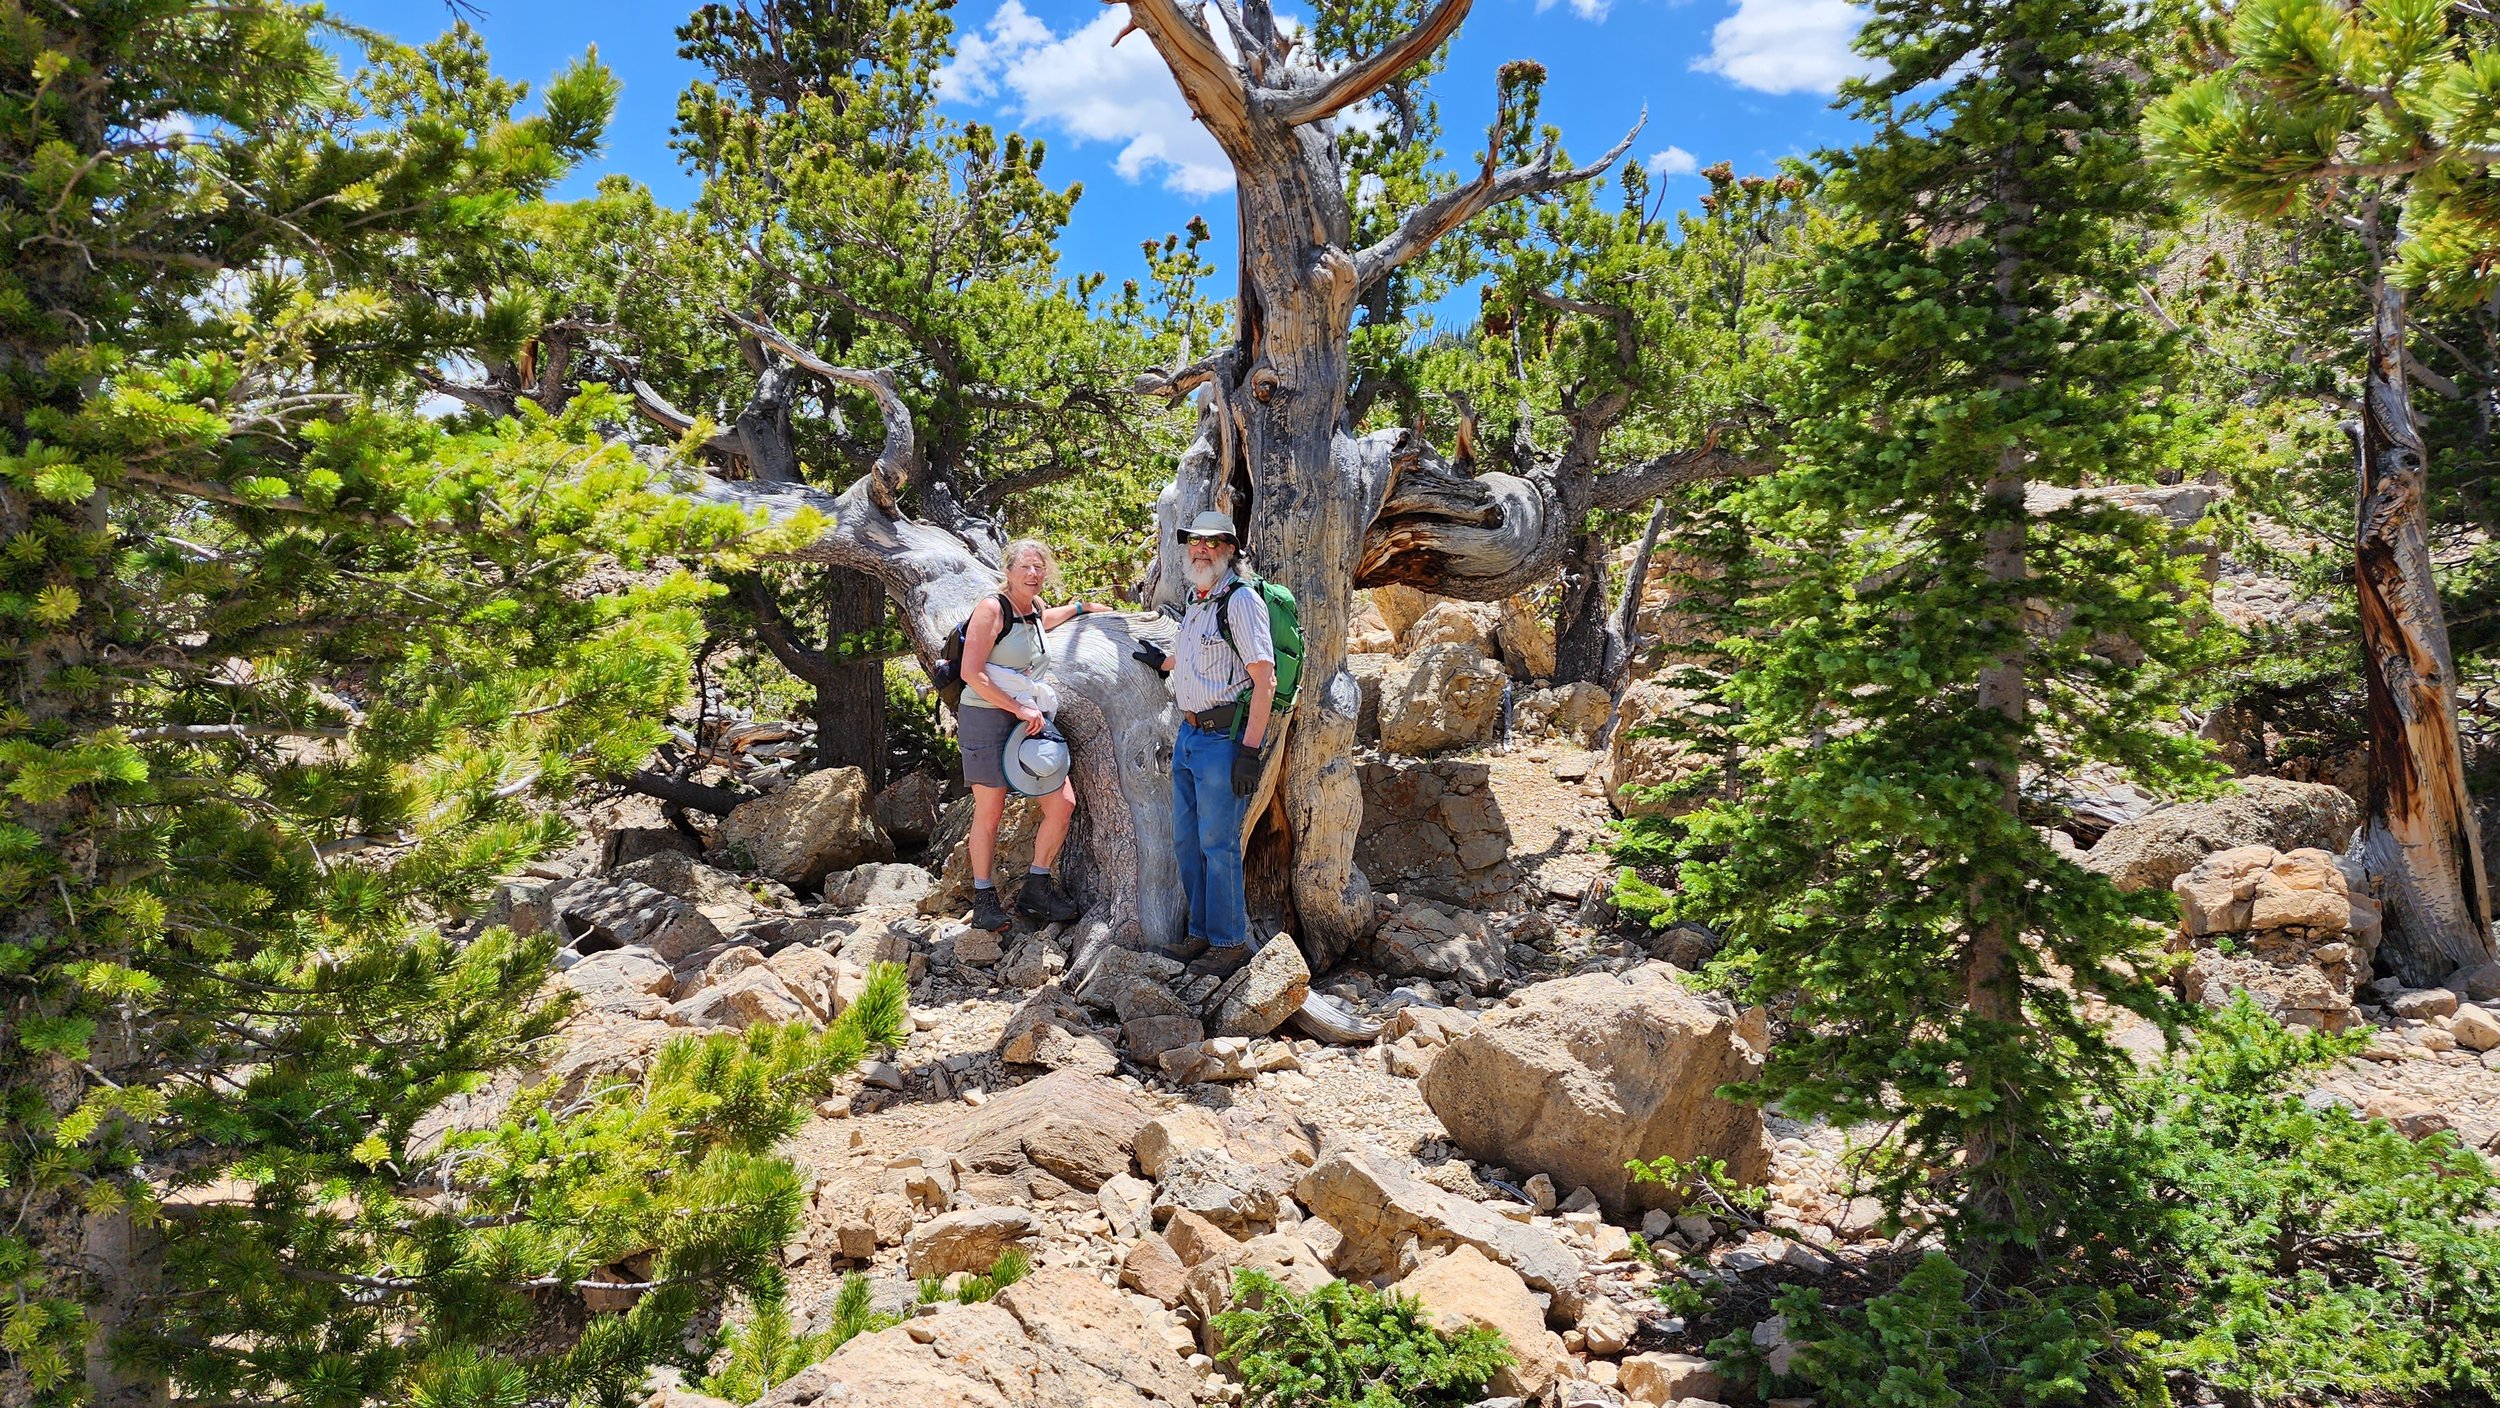 Mike and me in a grove of Bristlecone Pines on Limber Grove Trail